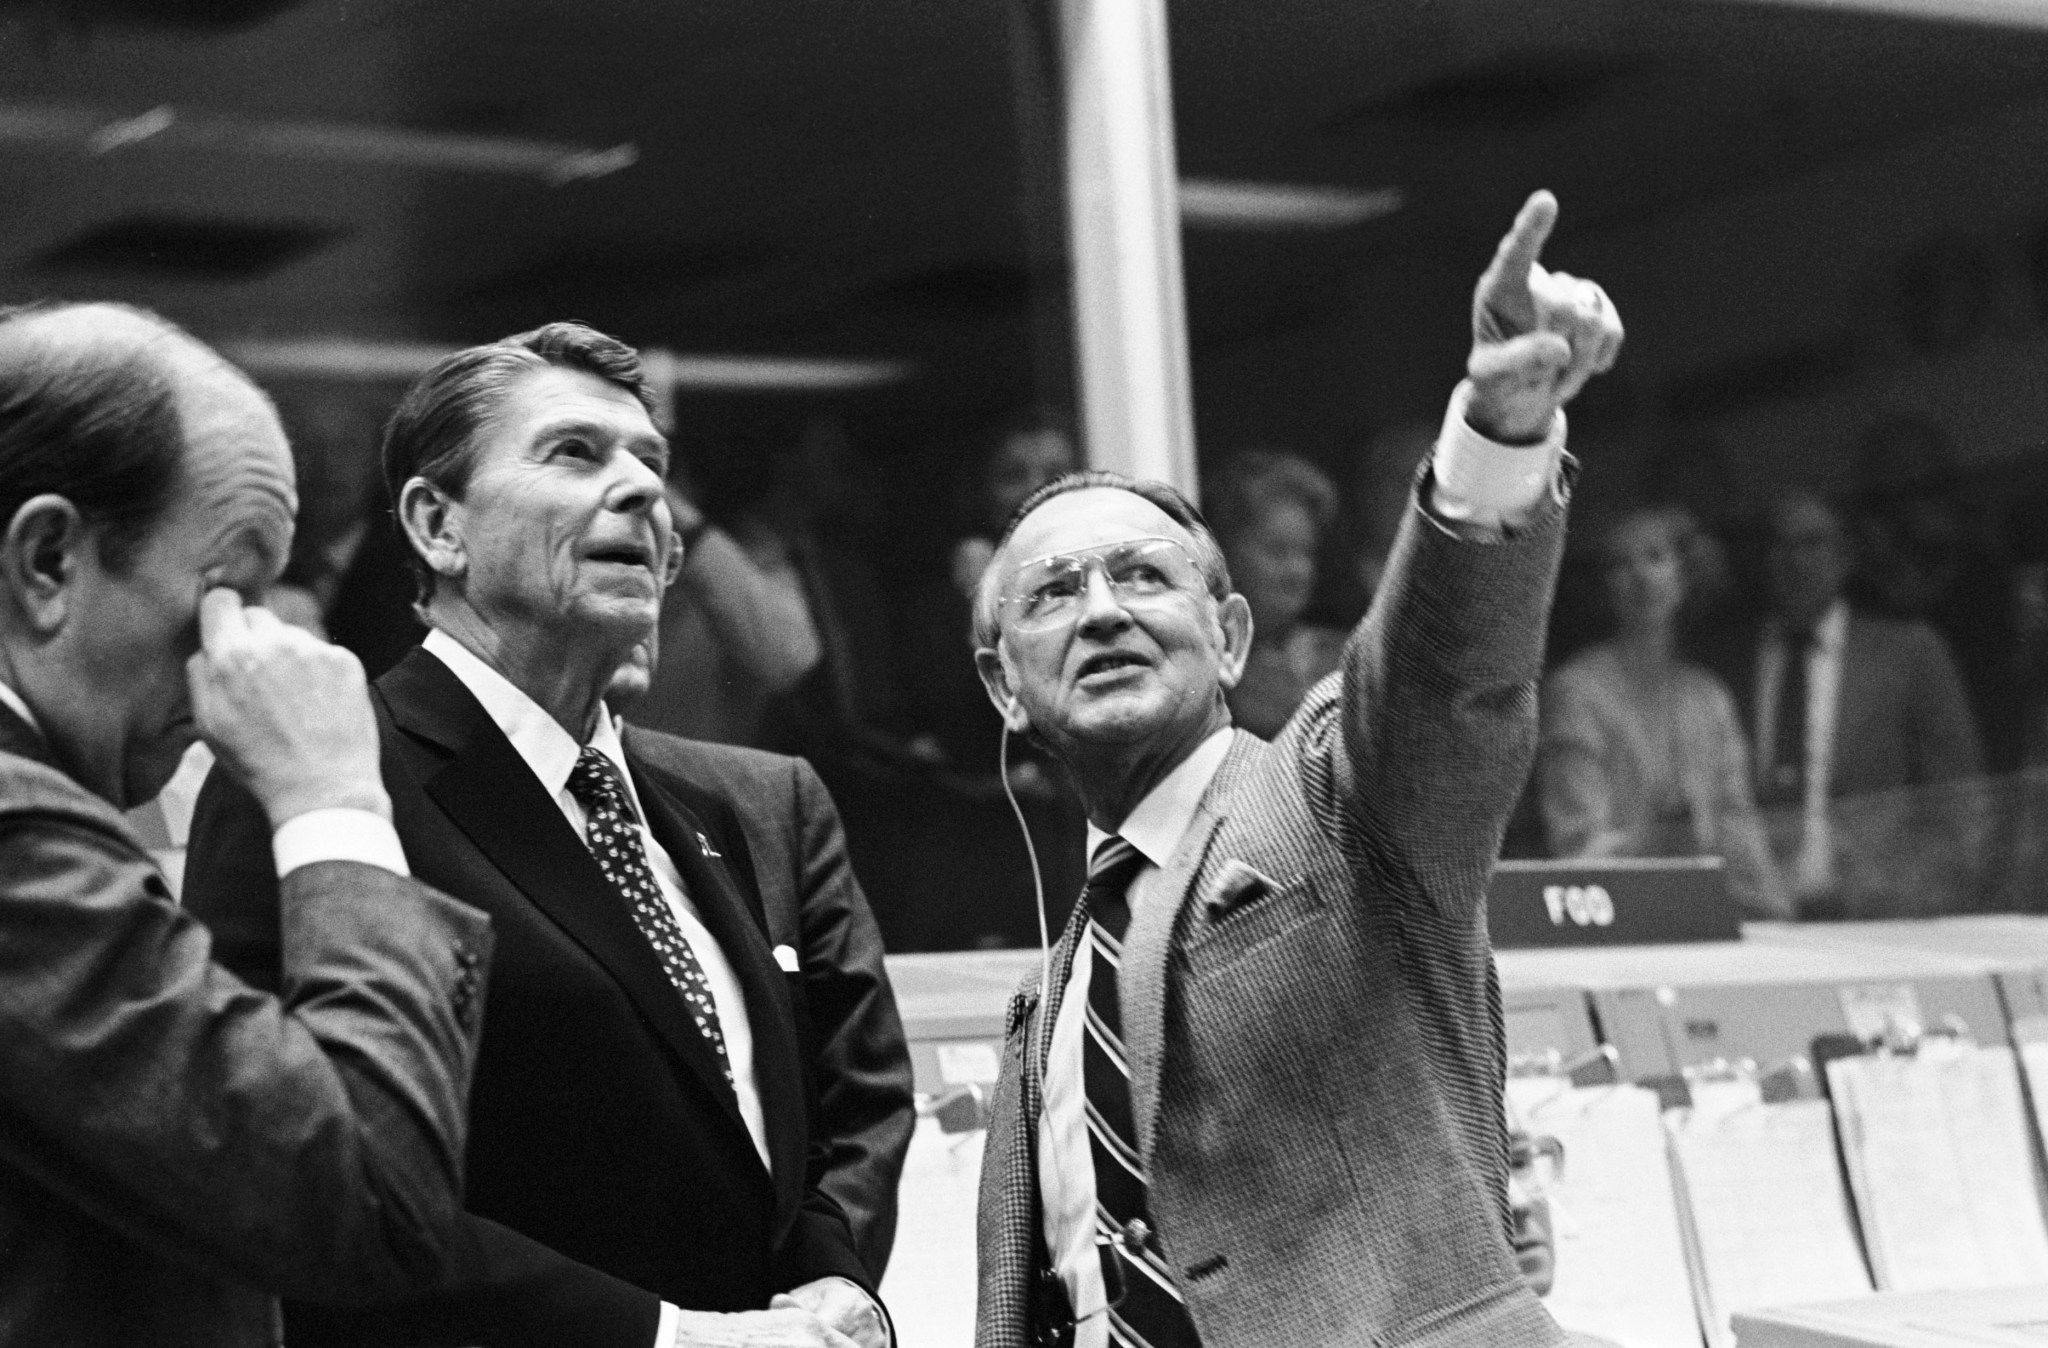 JSC Mission Operations Control Room (MOCR) during the STS-2 mission—President Ronald Reagan is briefed by JSC Director Christopher C. Kraft Jr, who is seen pointing toward the orbiter spotter on the projection plotter in the front of the MOCR in the Mission Control Center (13 Nov. 1981).